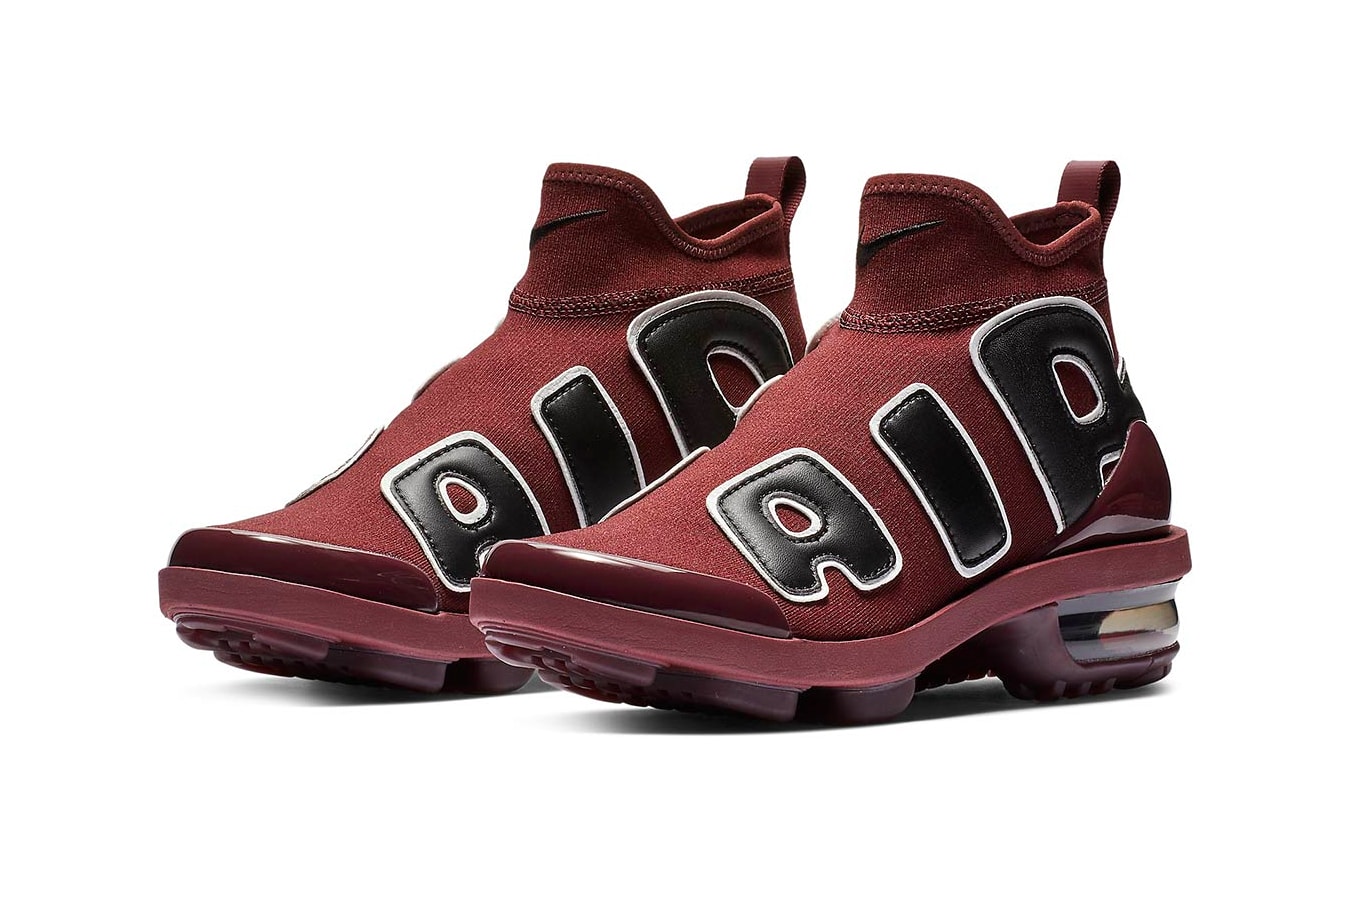  Nike Airquent "Black/Burgundy" Release Date price sneaker 